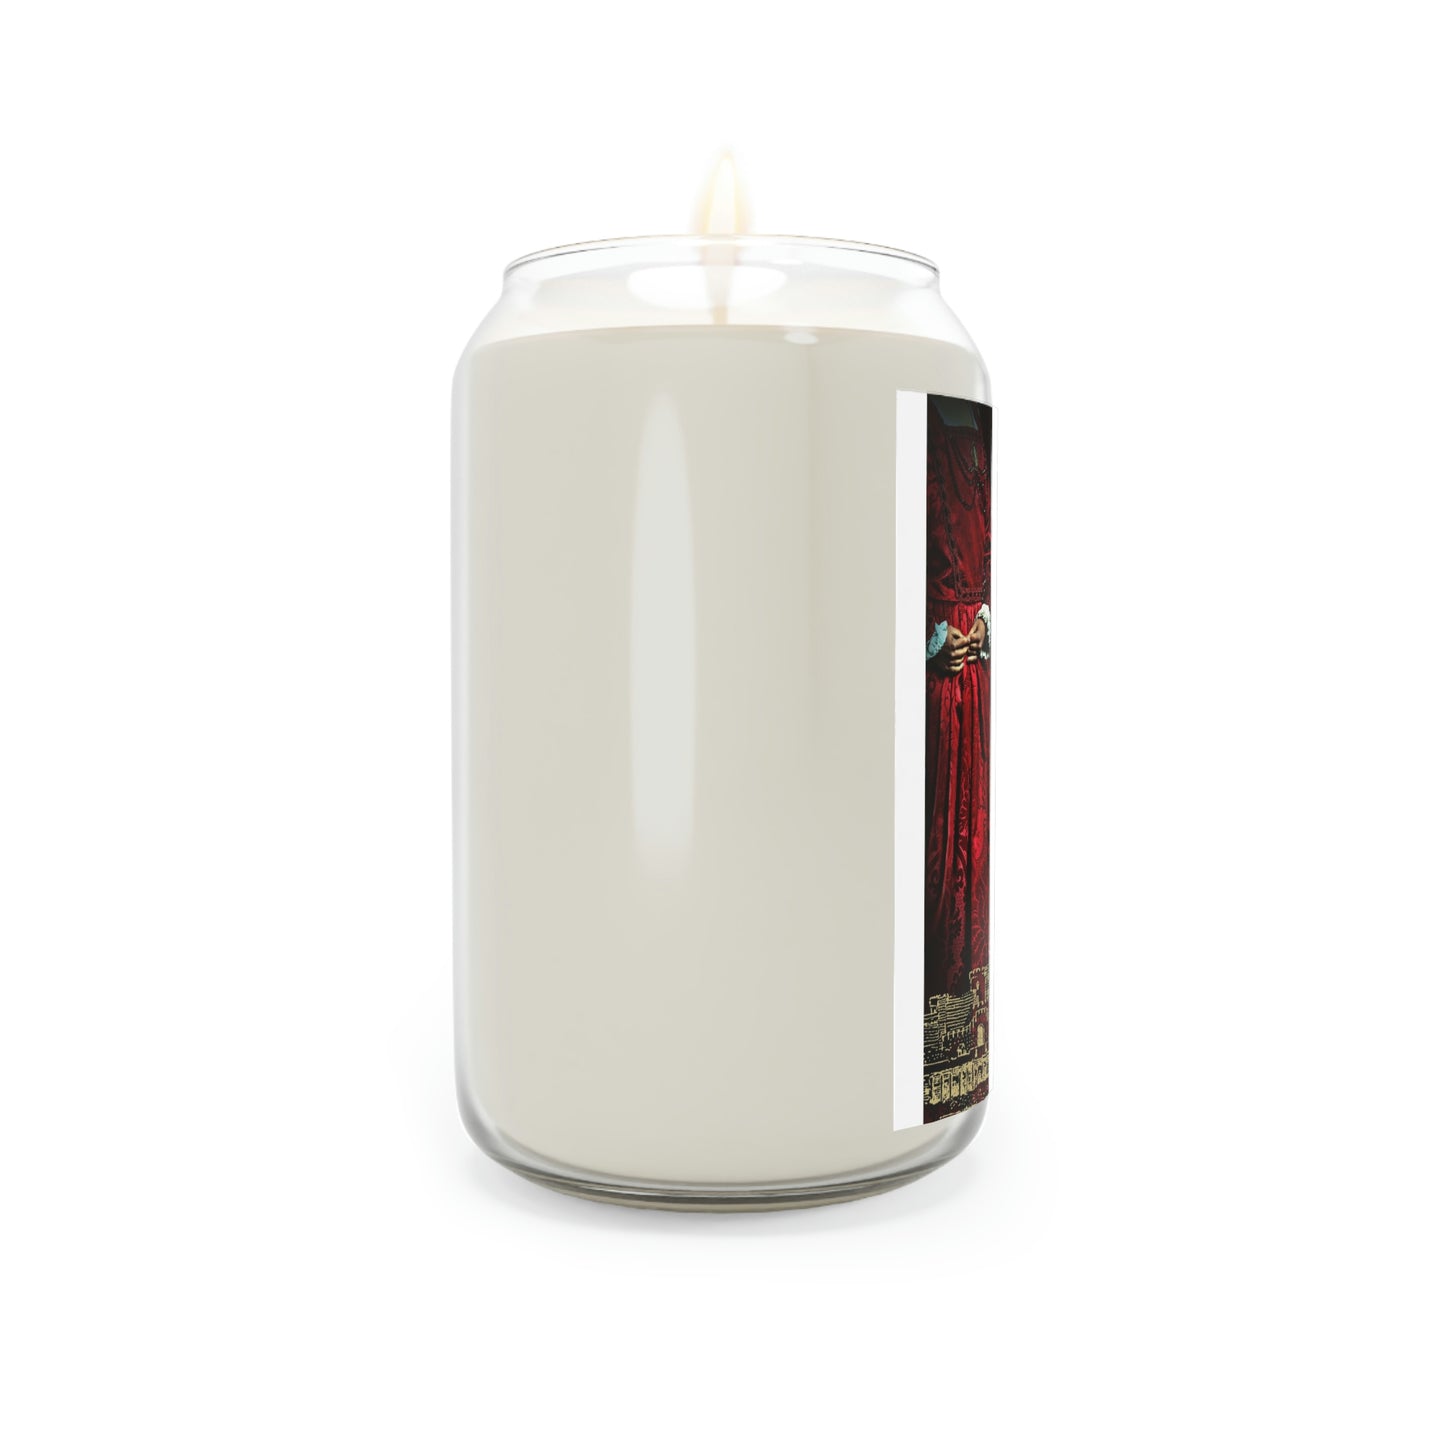 The Other Side Of Silence - Scented Candle